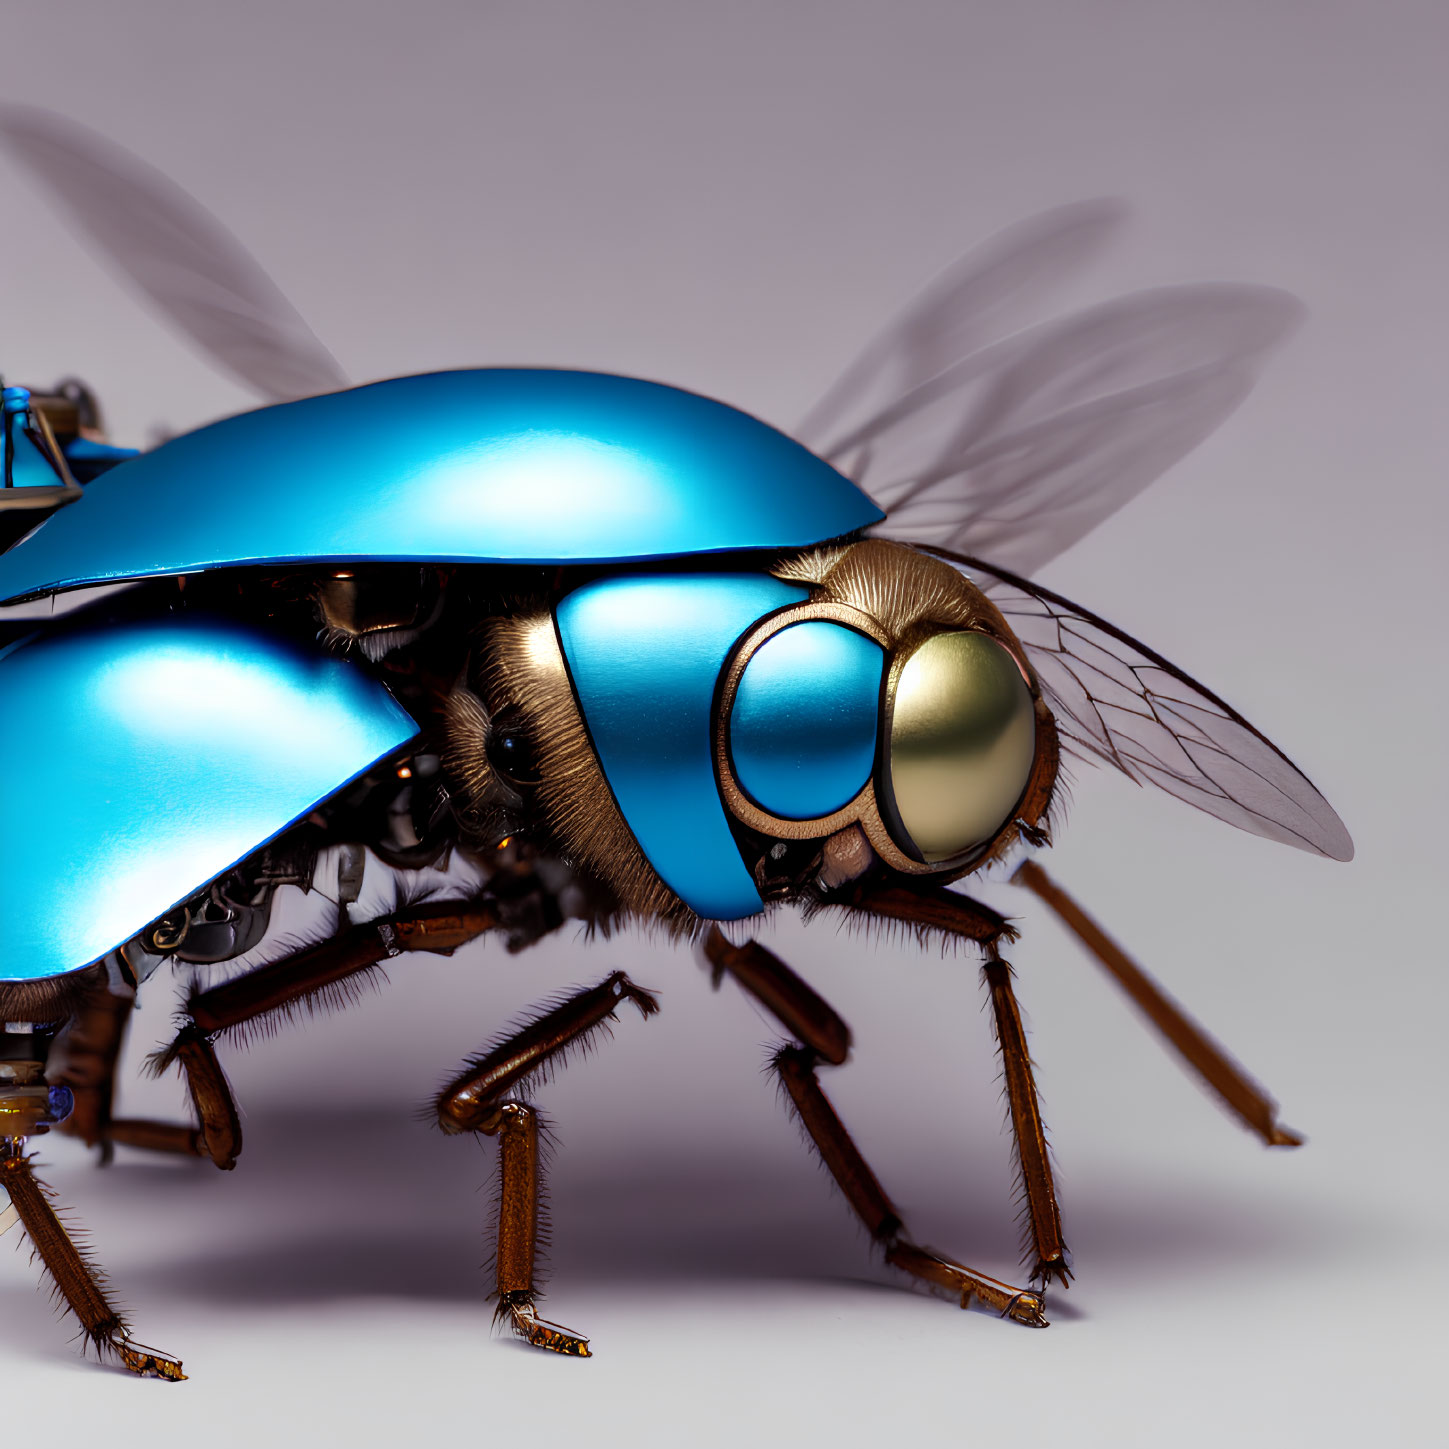 Detailed Close-Up of Shiny Blue Robotic Bee with Translucent Wings